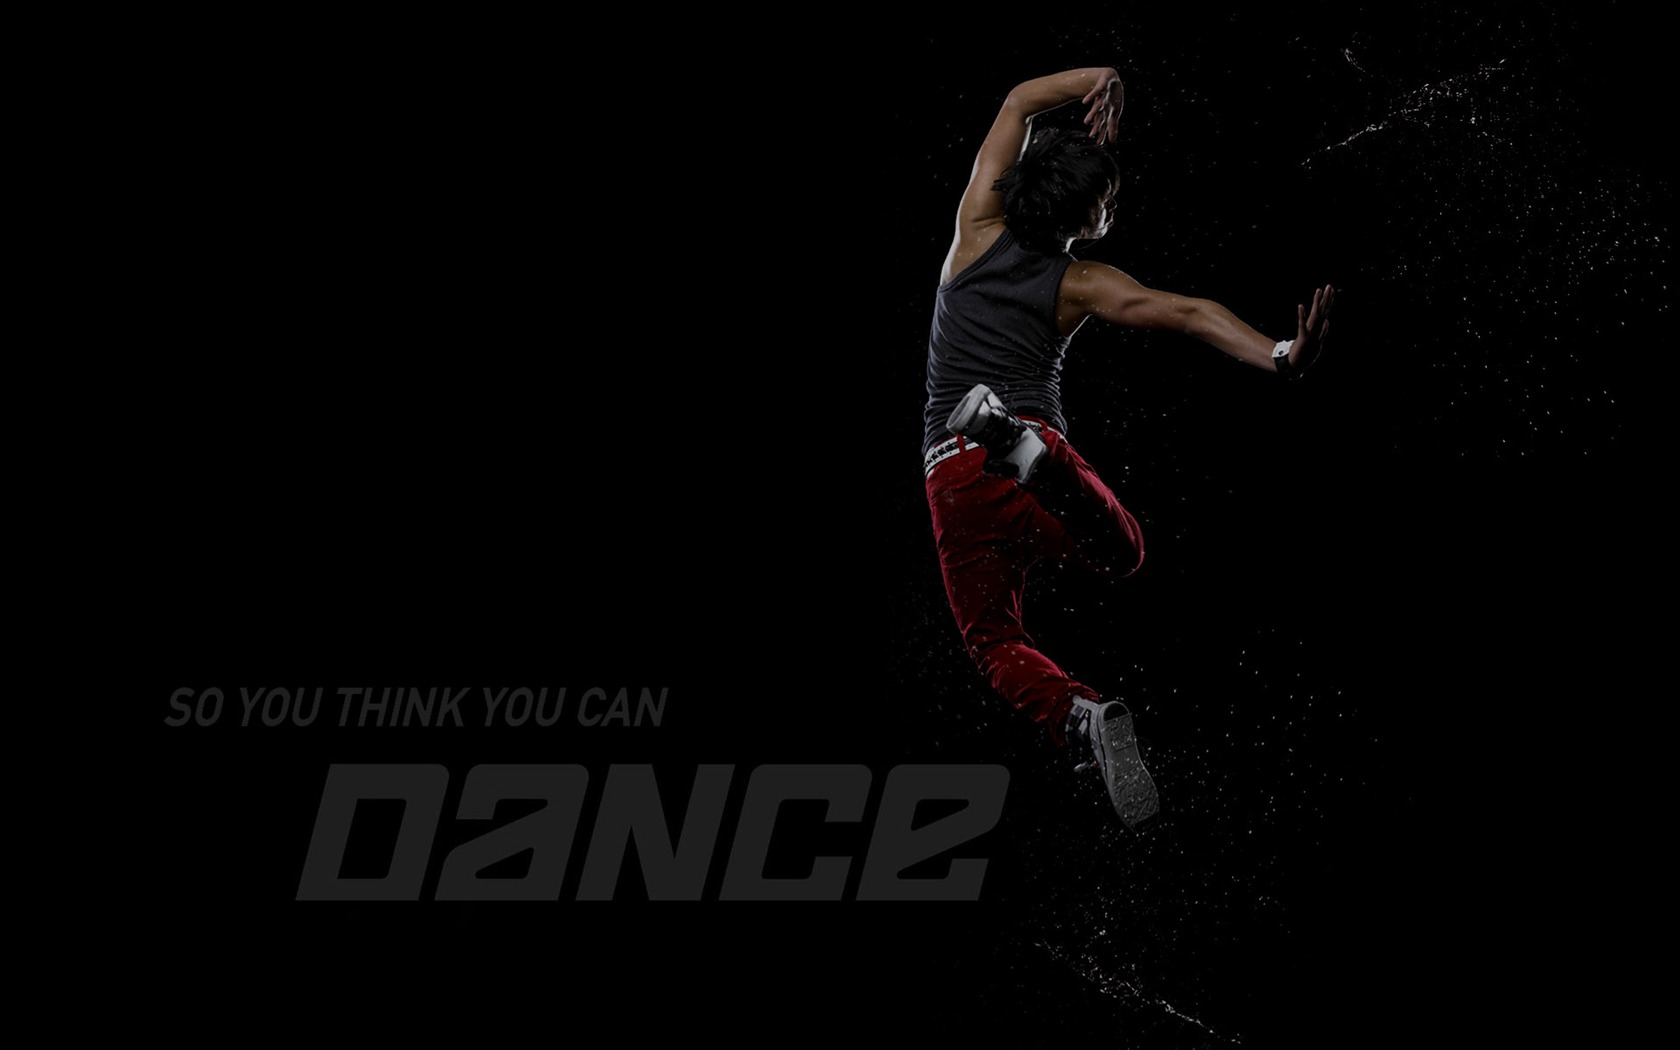 So You Think You Can Dance 舞林争霸 壁纸(二)12 - 1680x1050